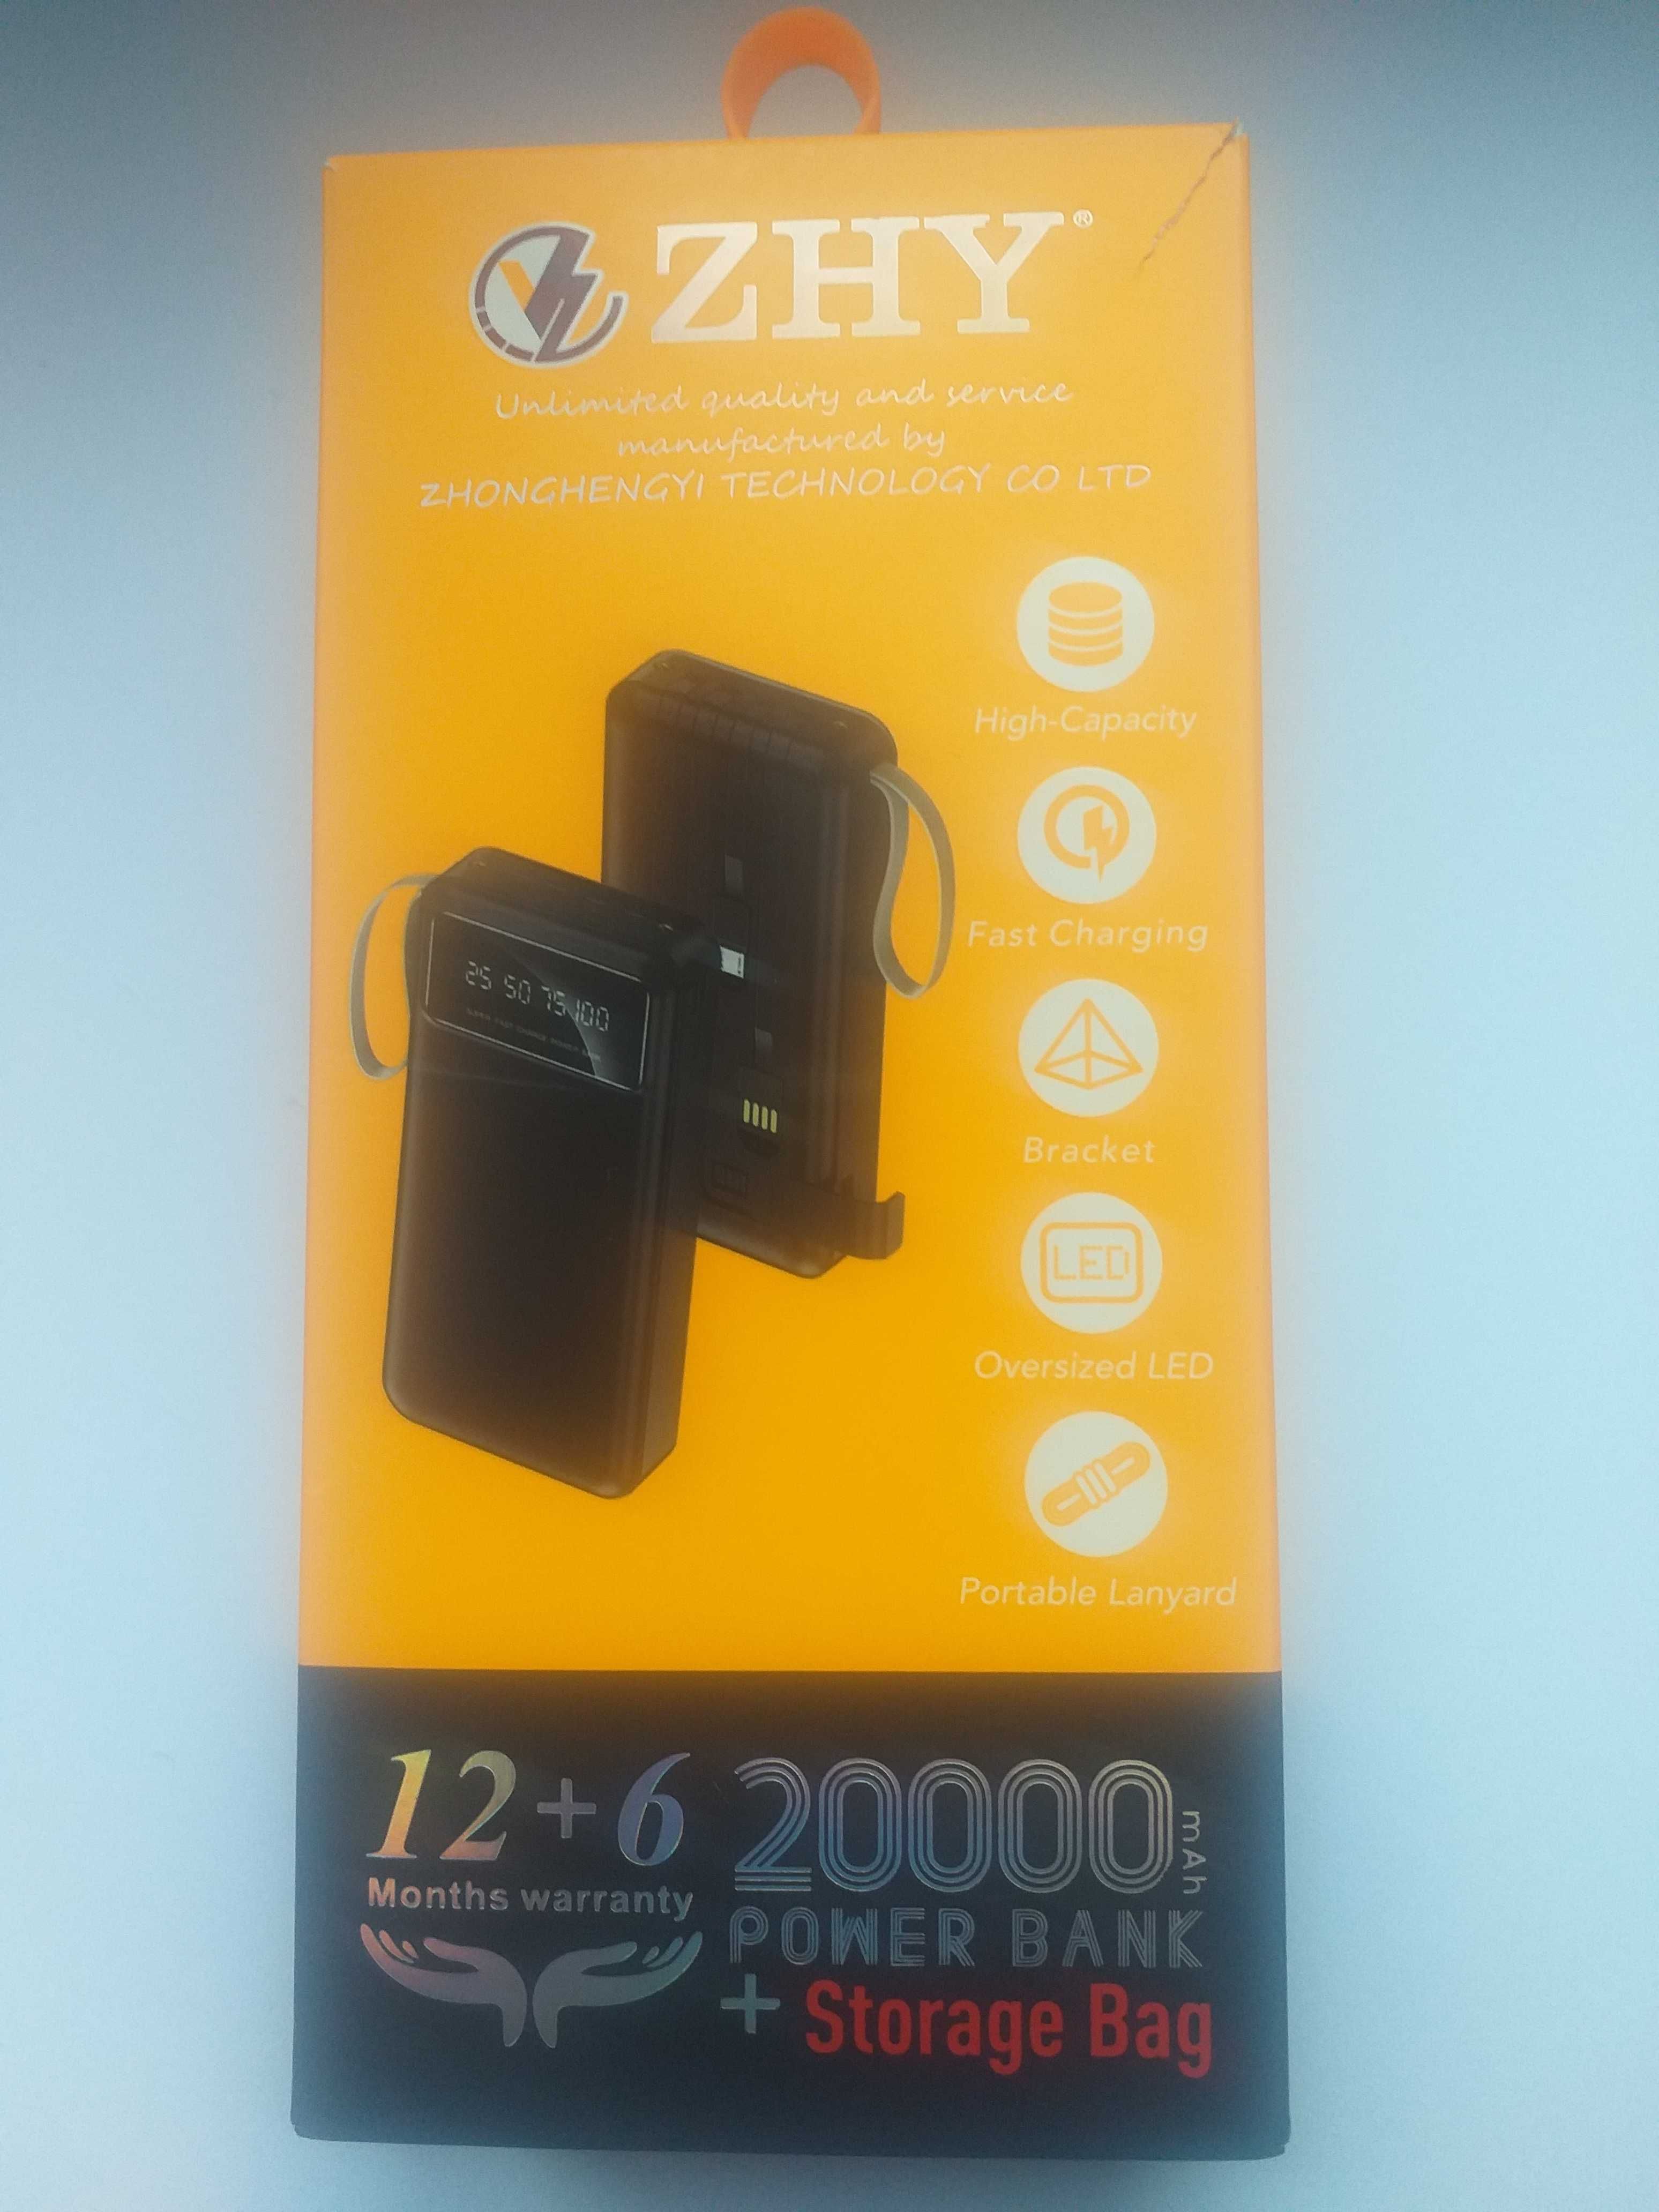 Power Bank ZHY ZHY-489